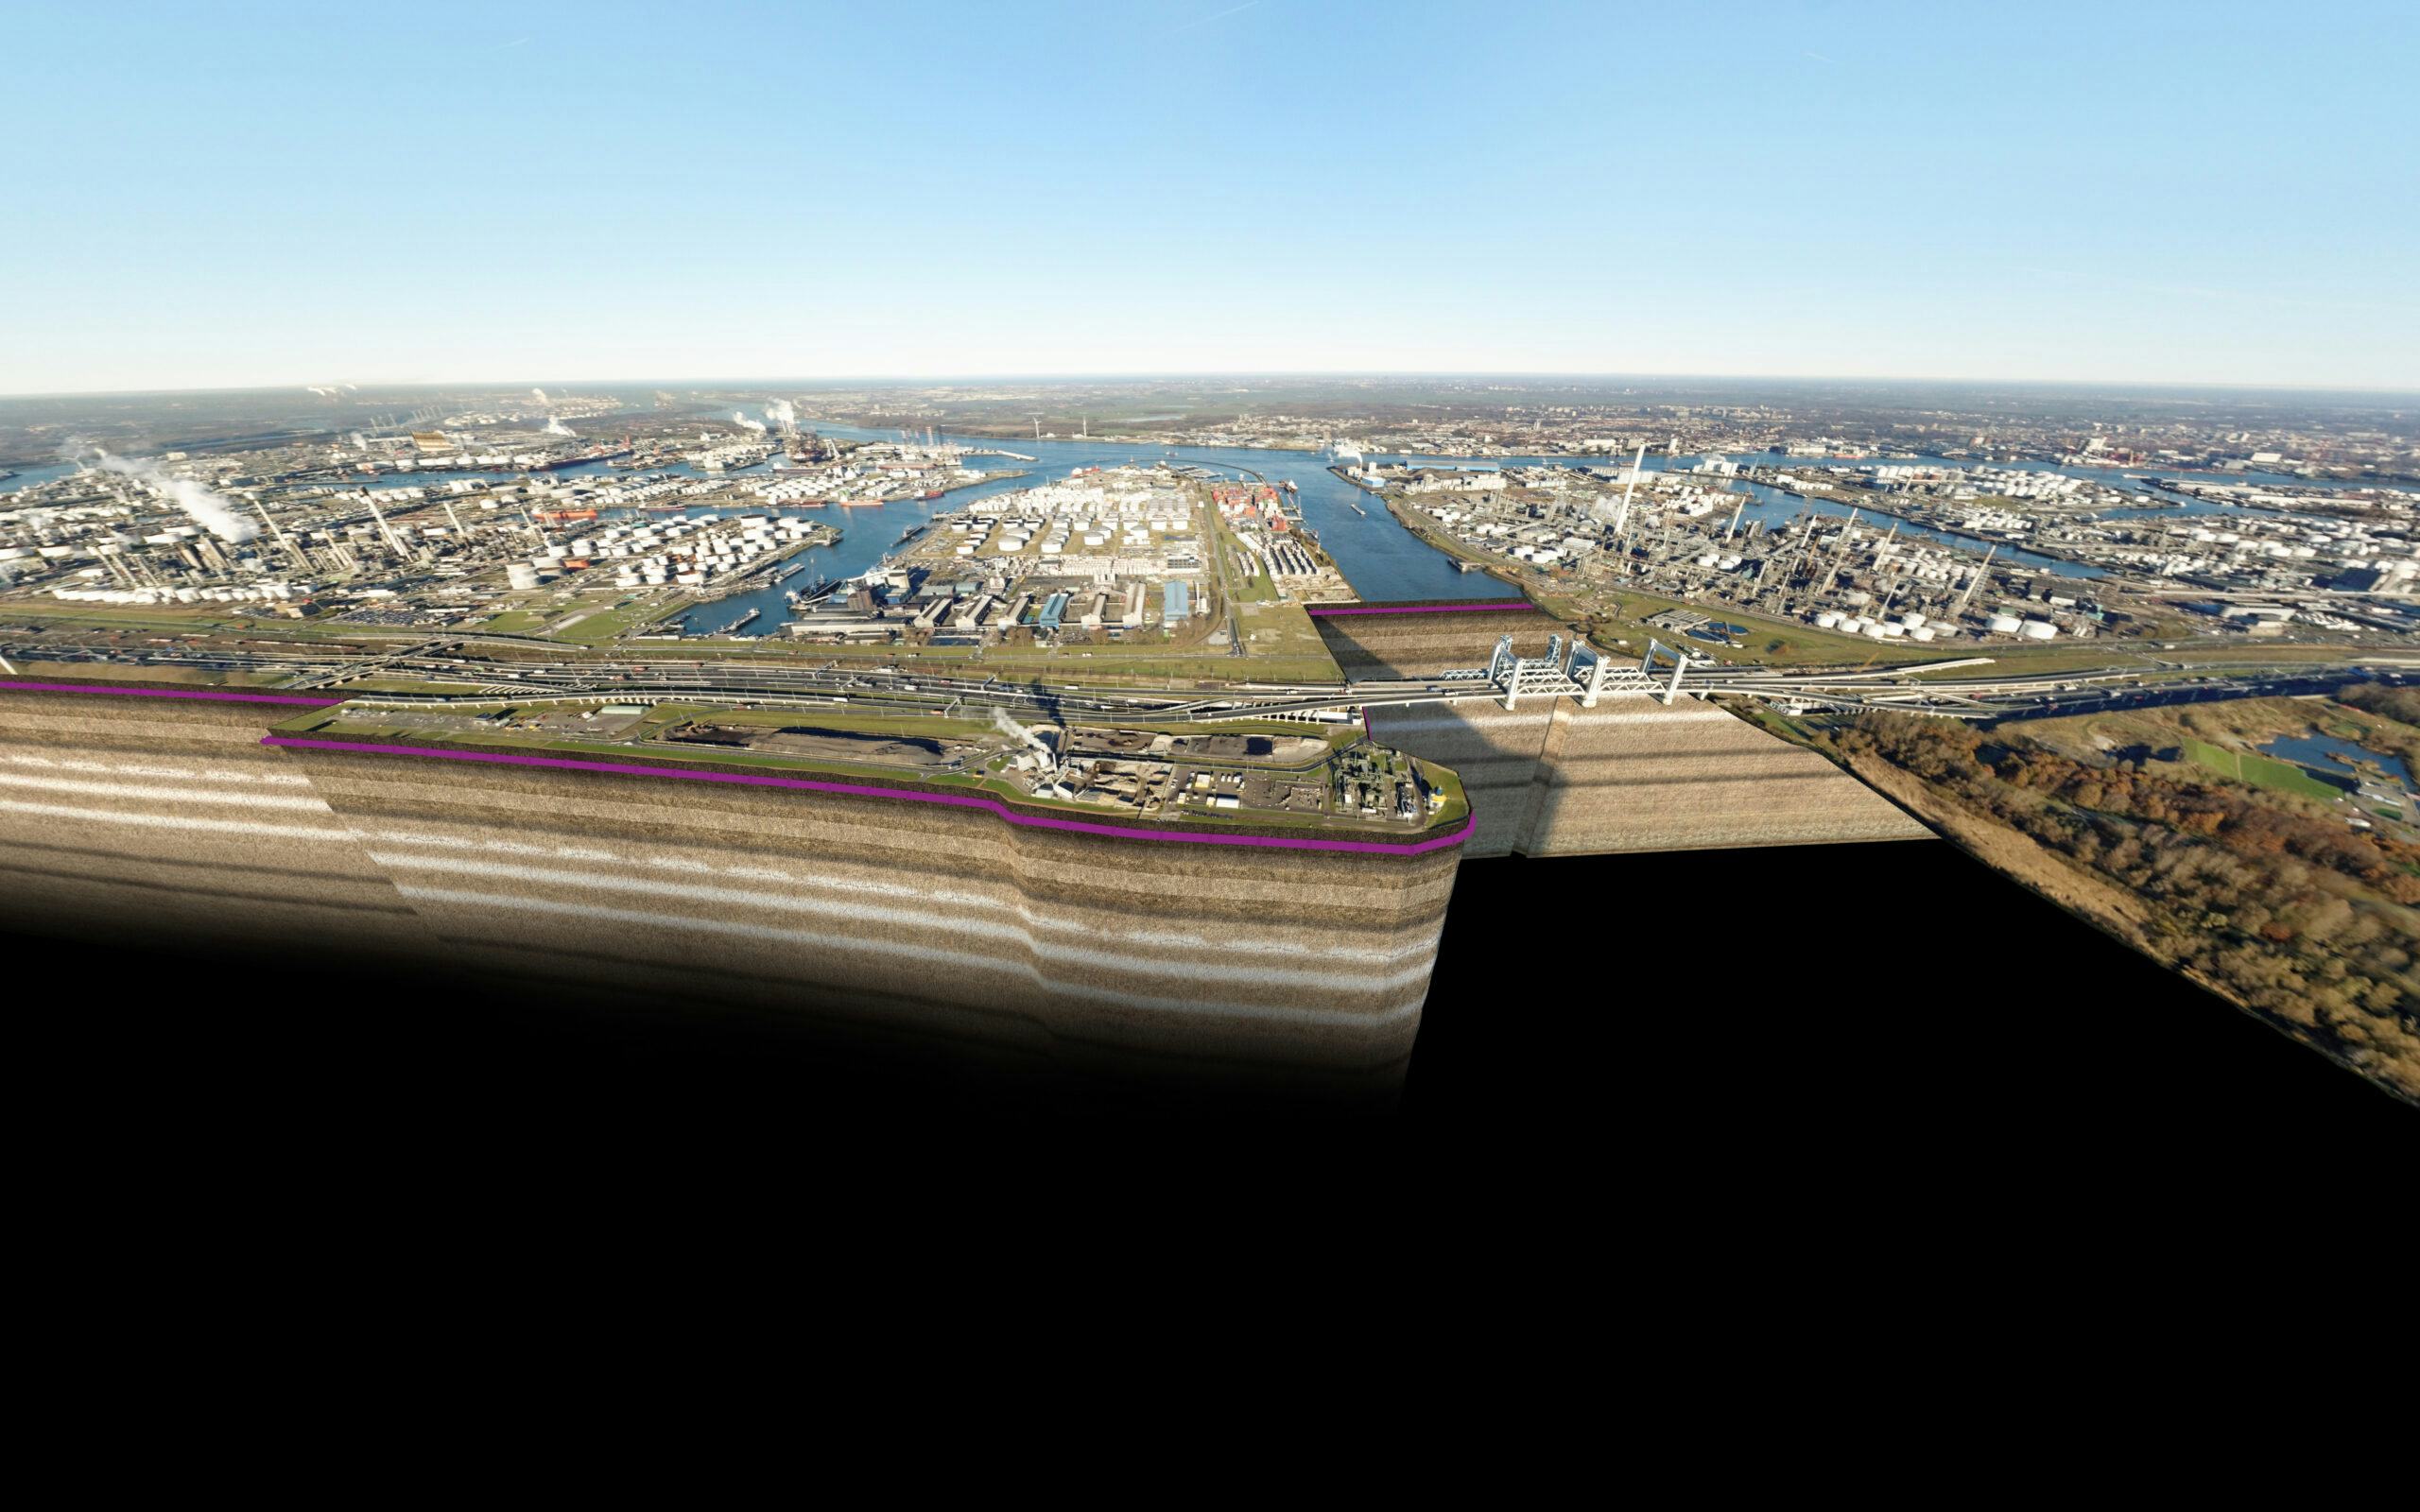 Porthos-project in Rotterdamse haven. Beeld: Porthos